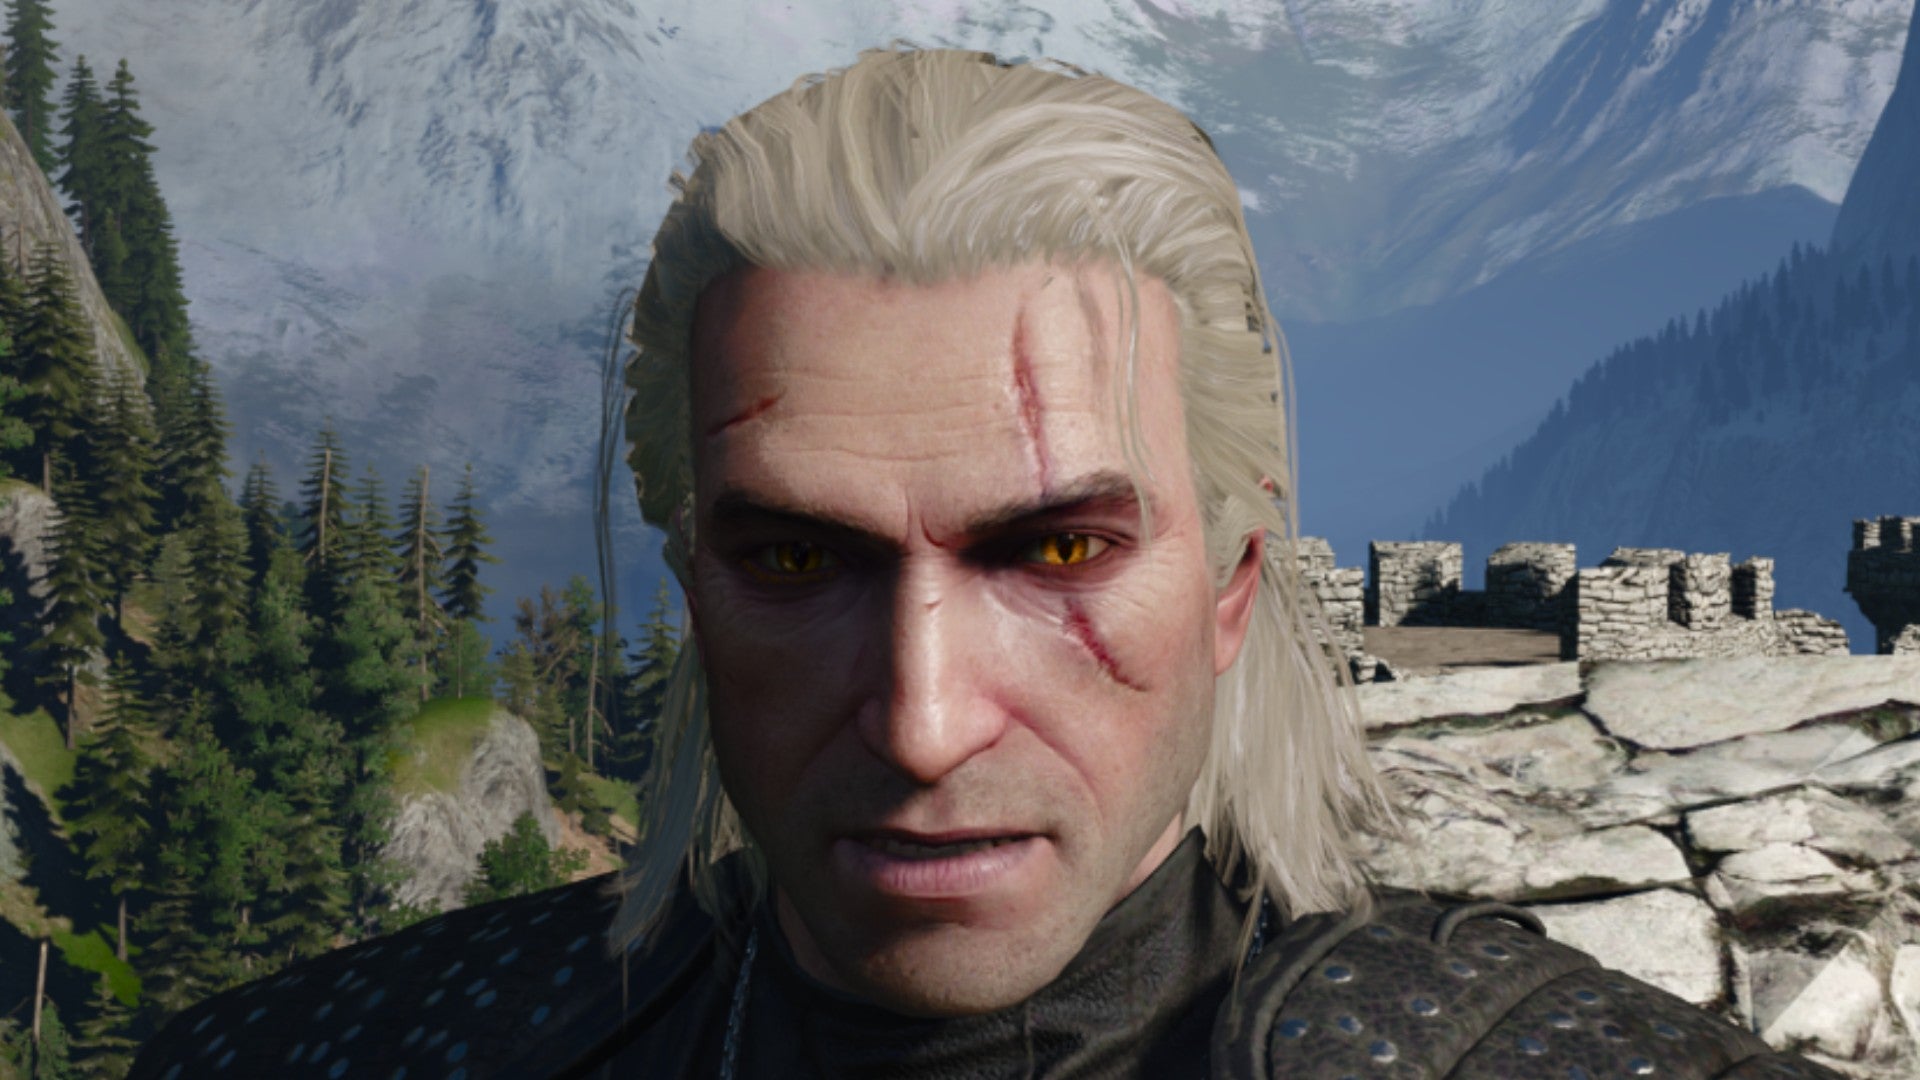 Witcher 3 image showing Geralt with a clean shave.